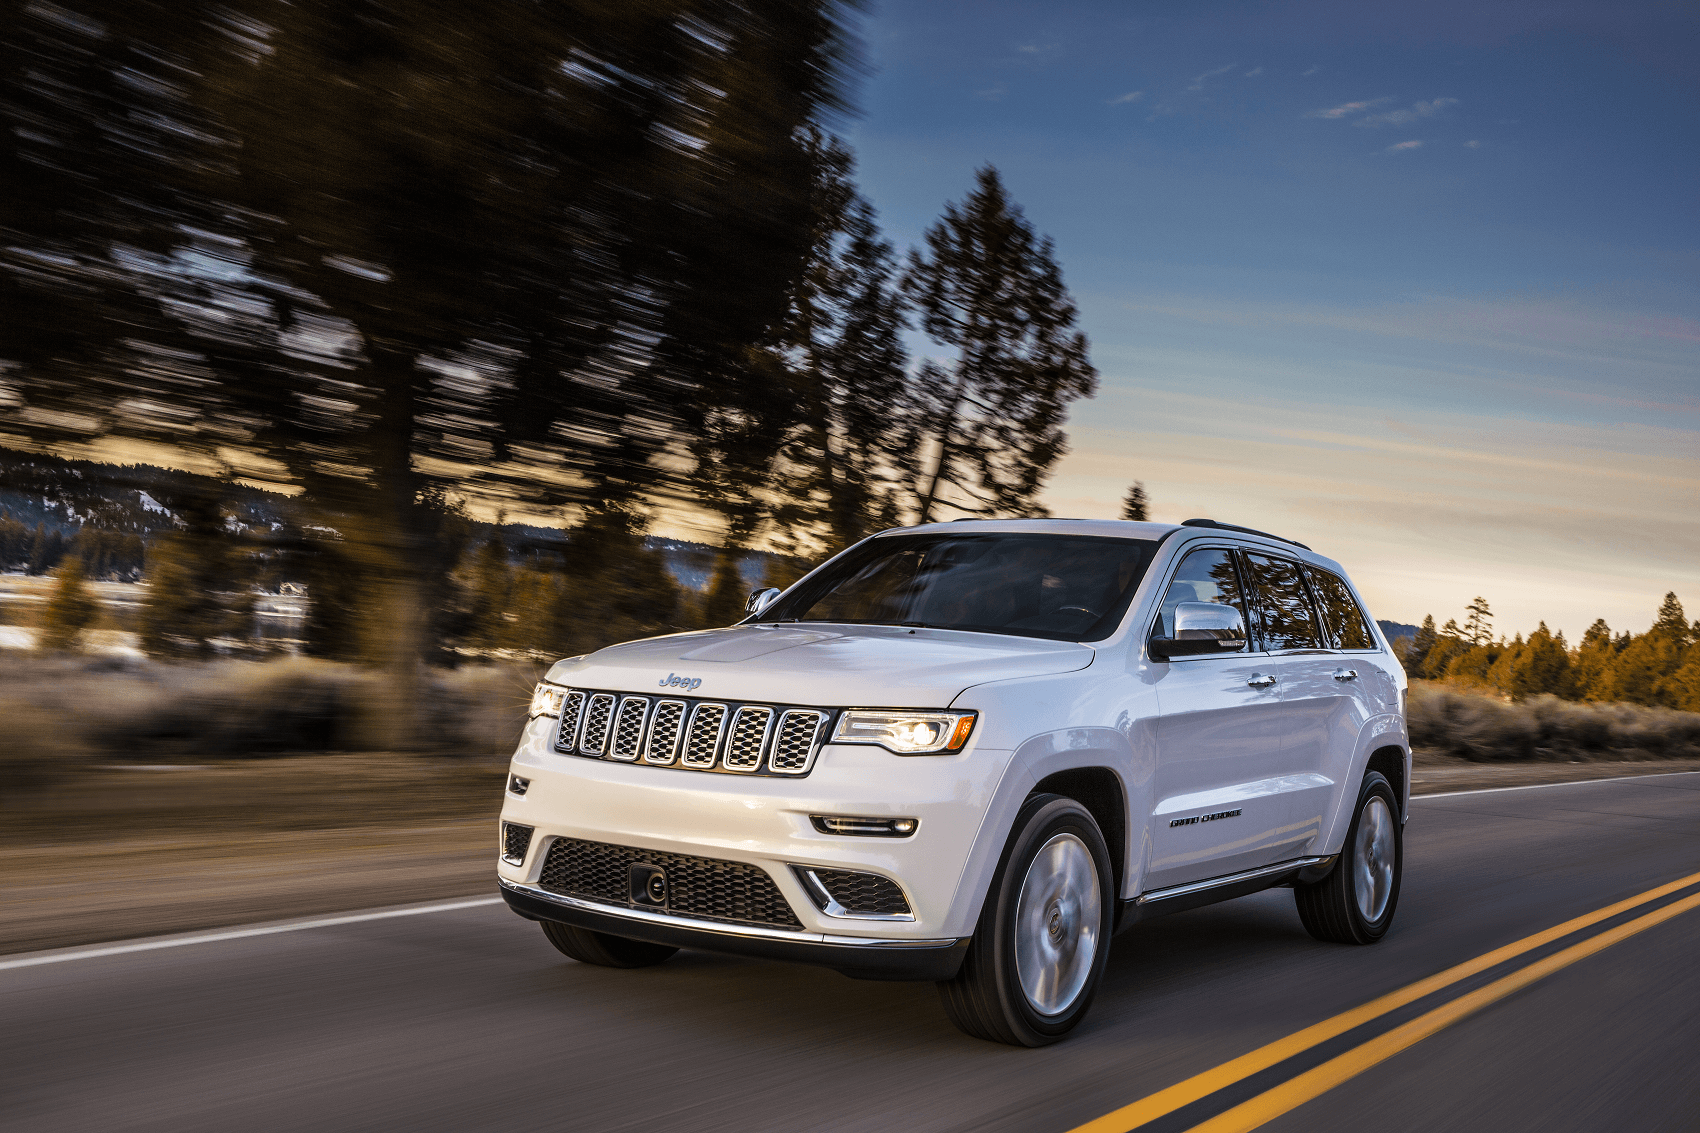 Used Jeep Cherokee for sale or lease near Taylor MI